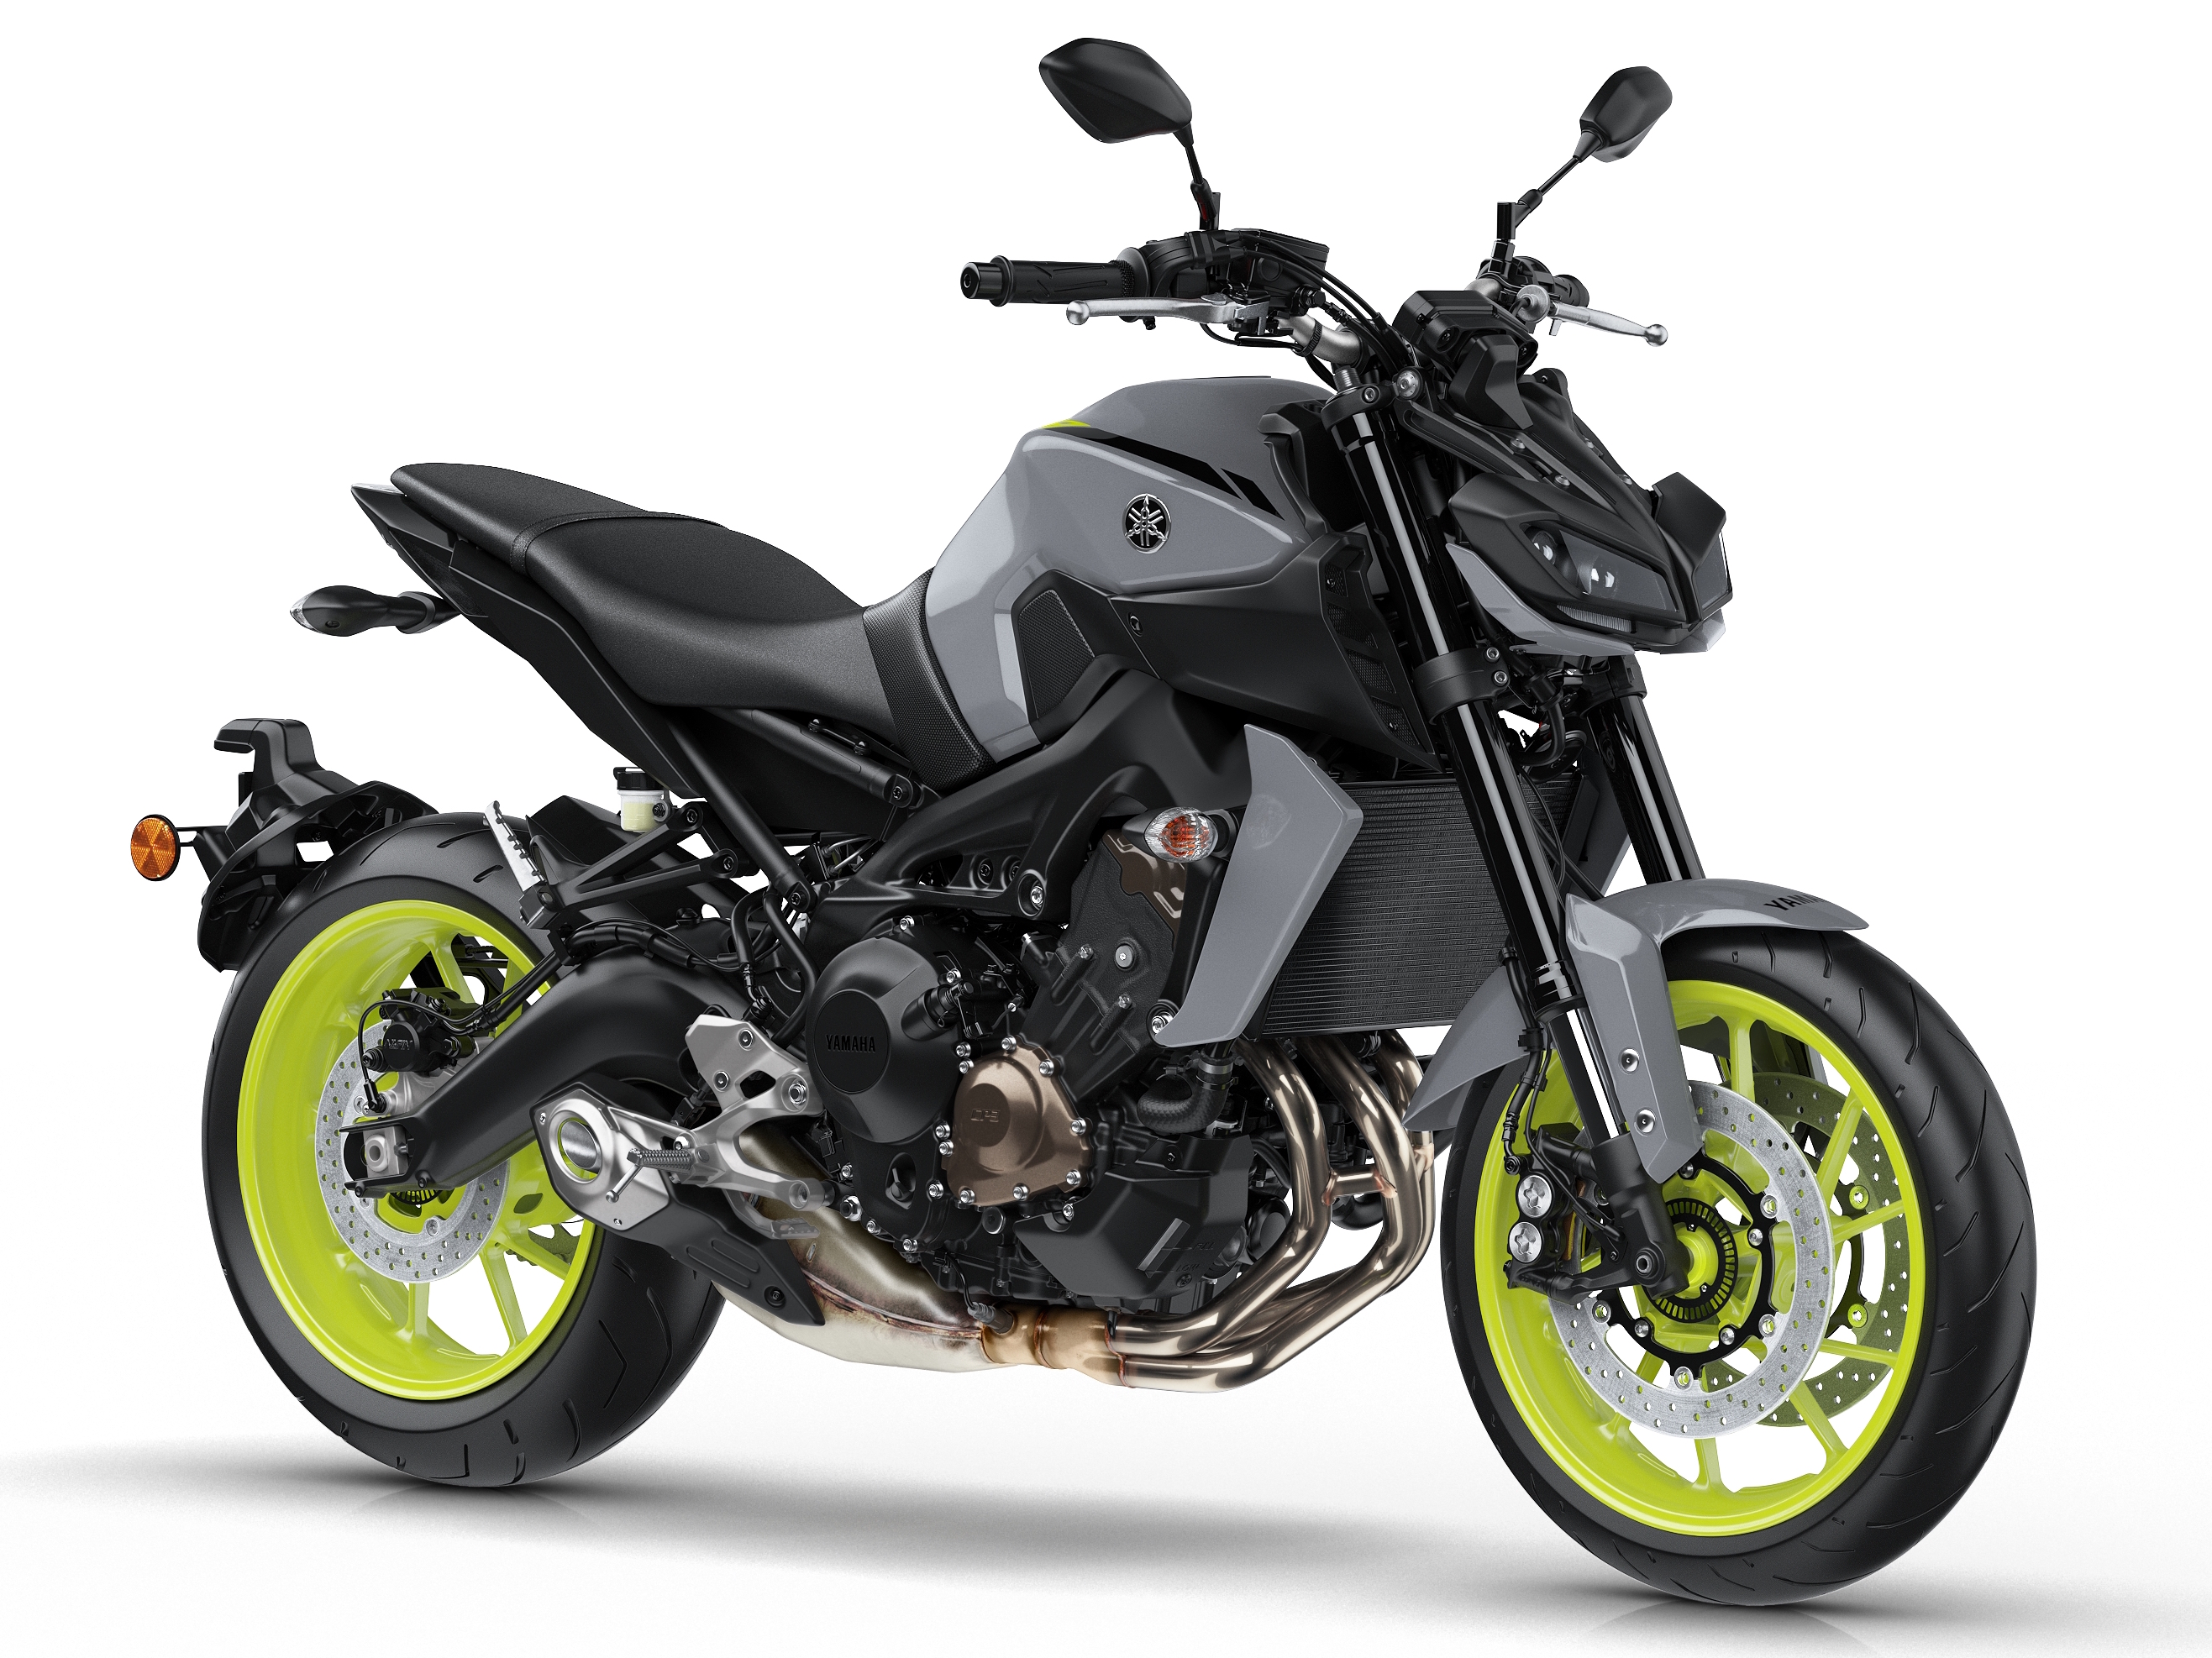 2017 Yamaha MT09 updated for the new year now with LED lights